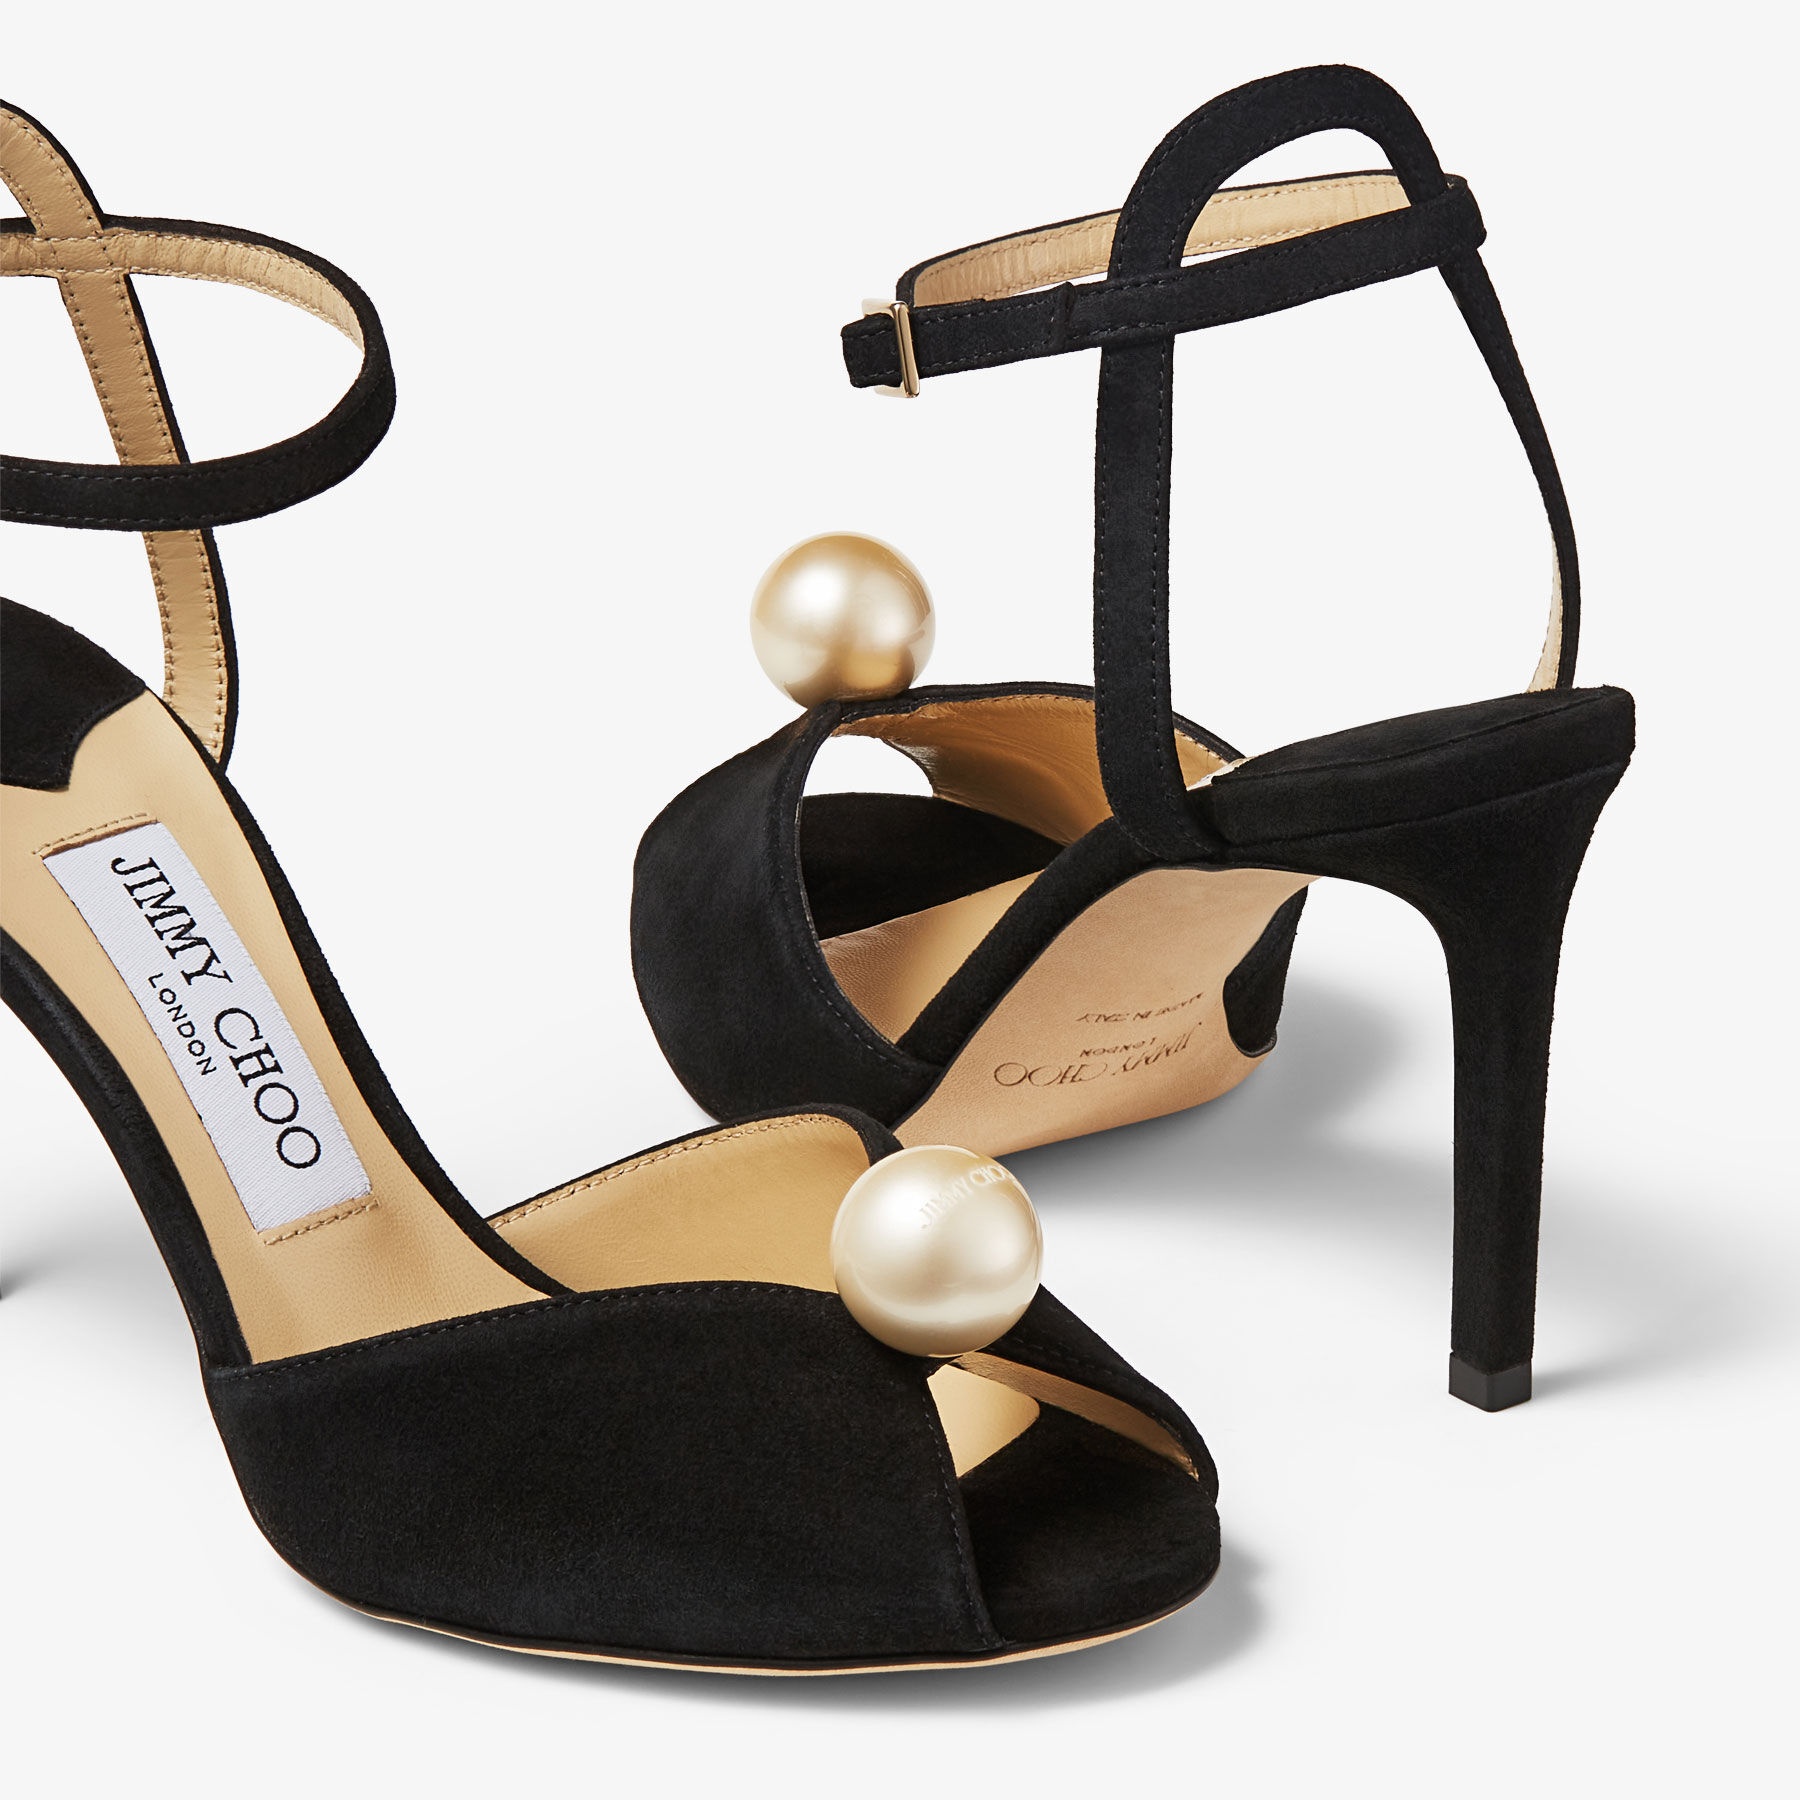 Sacora 85
Black Suede Sandals with Pearl Embellishment - 4